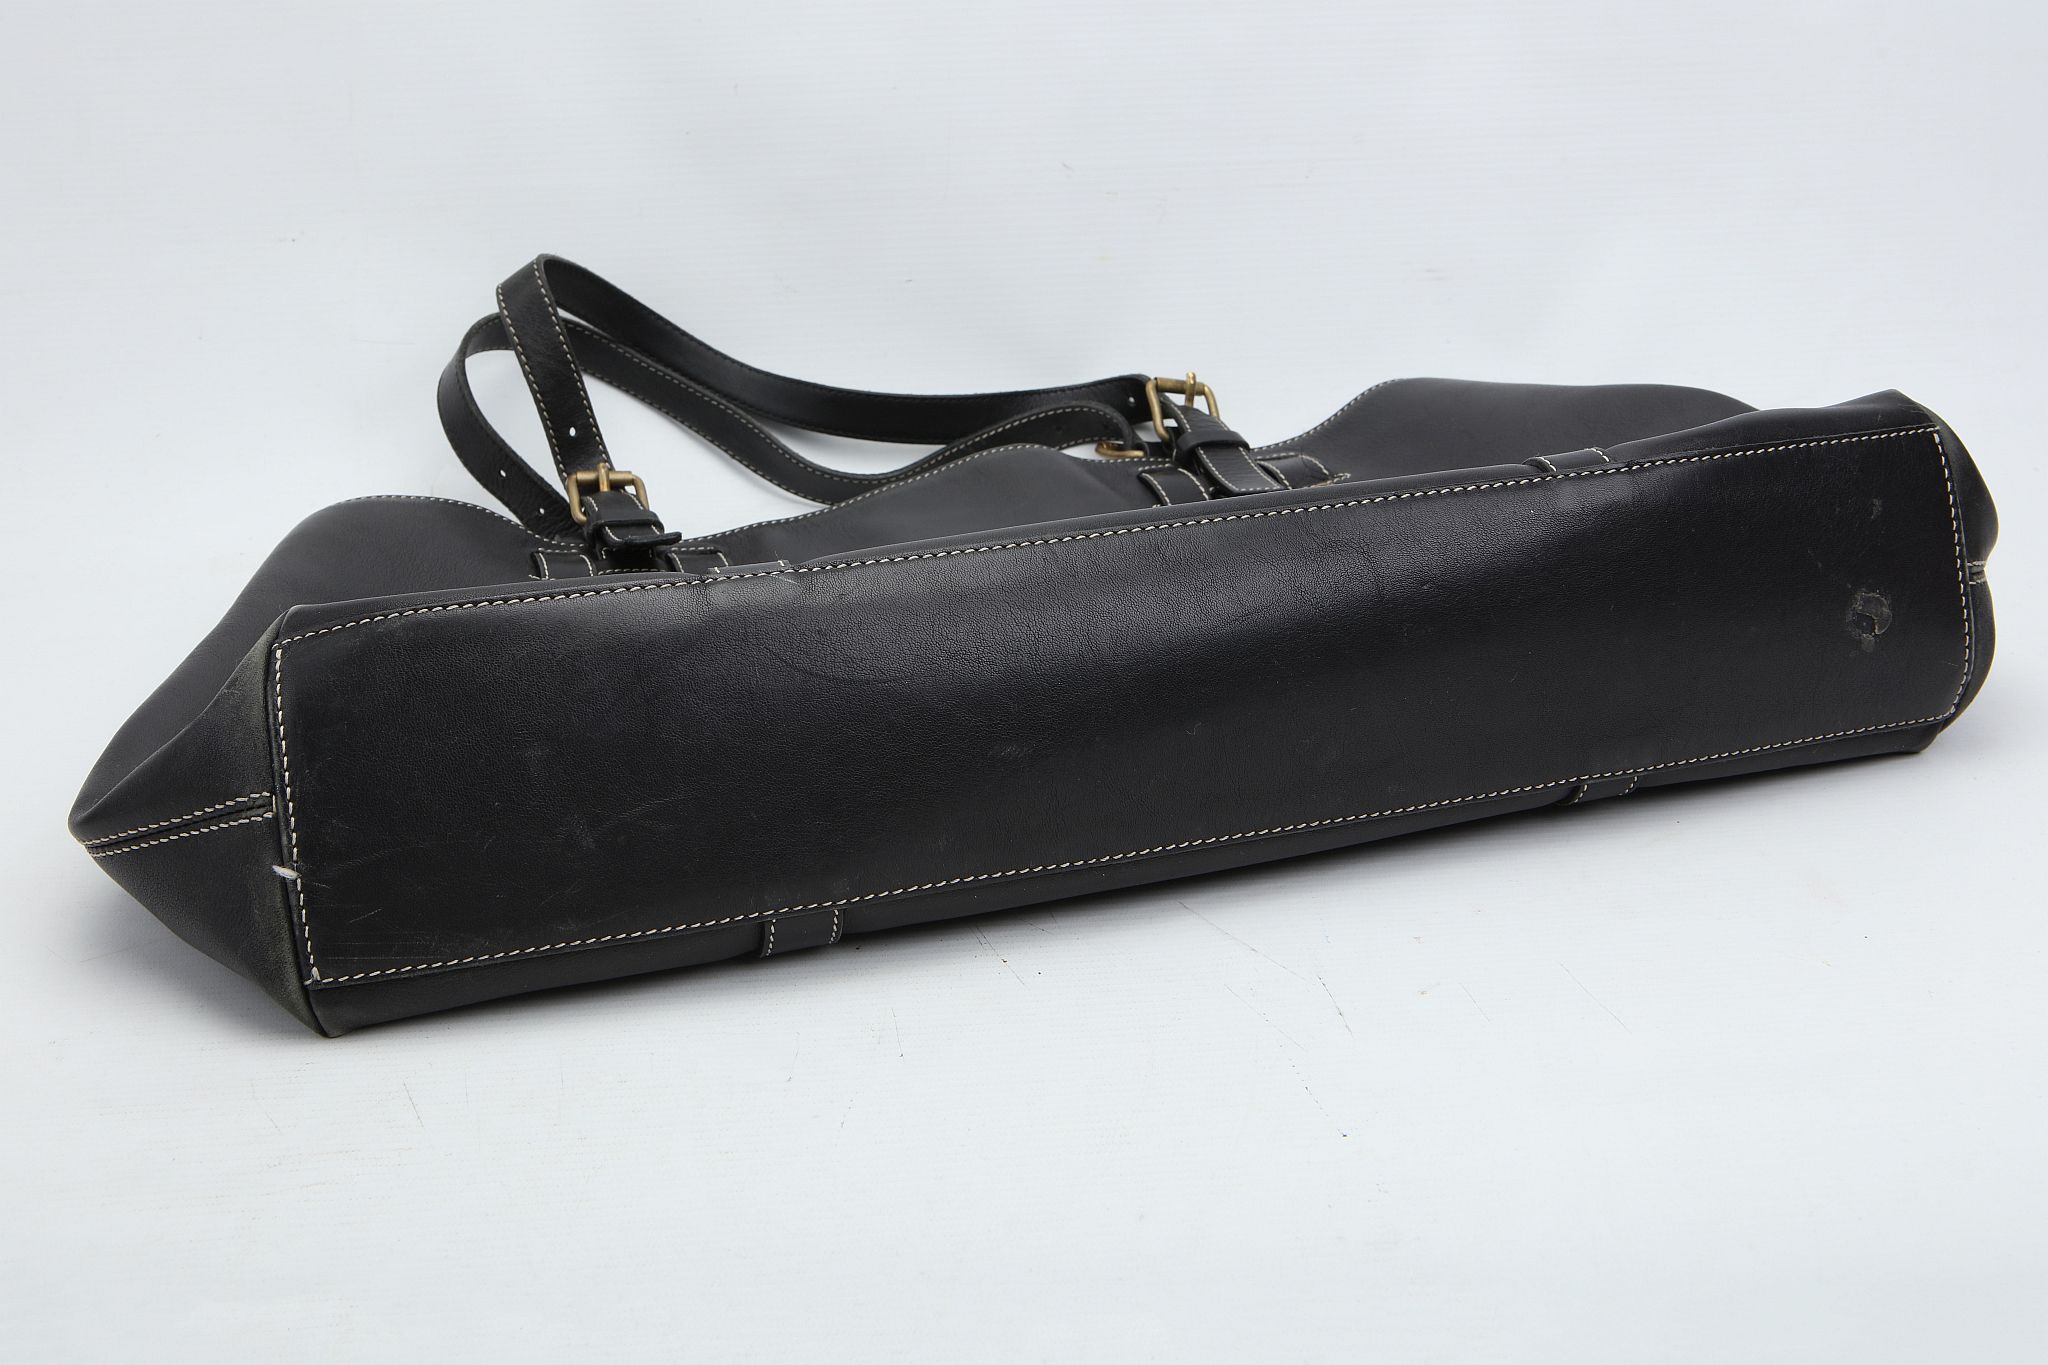 CELINE SHOPPER, black leather with white stitching, brass hardware, 48cm wide, 30cm high - Image 5 of 10